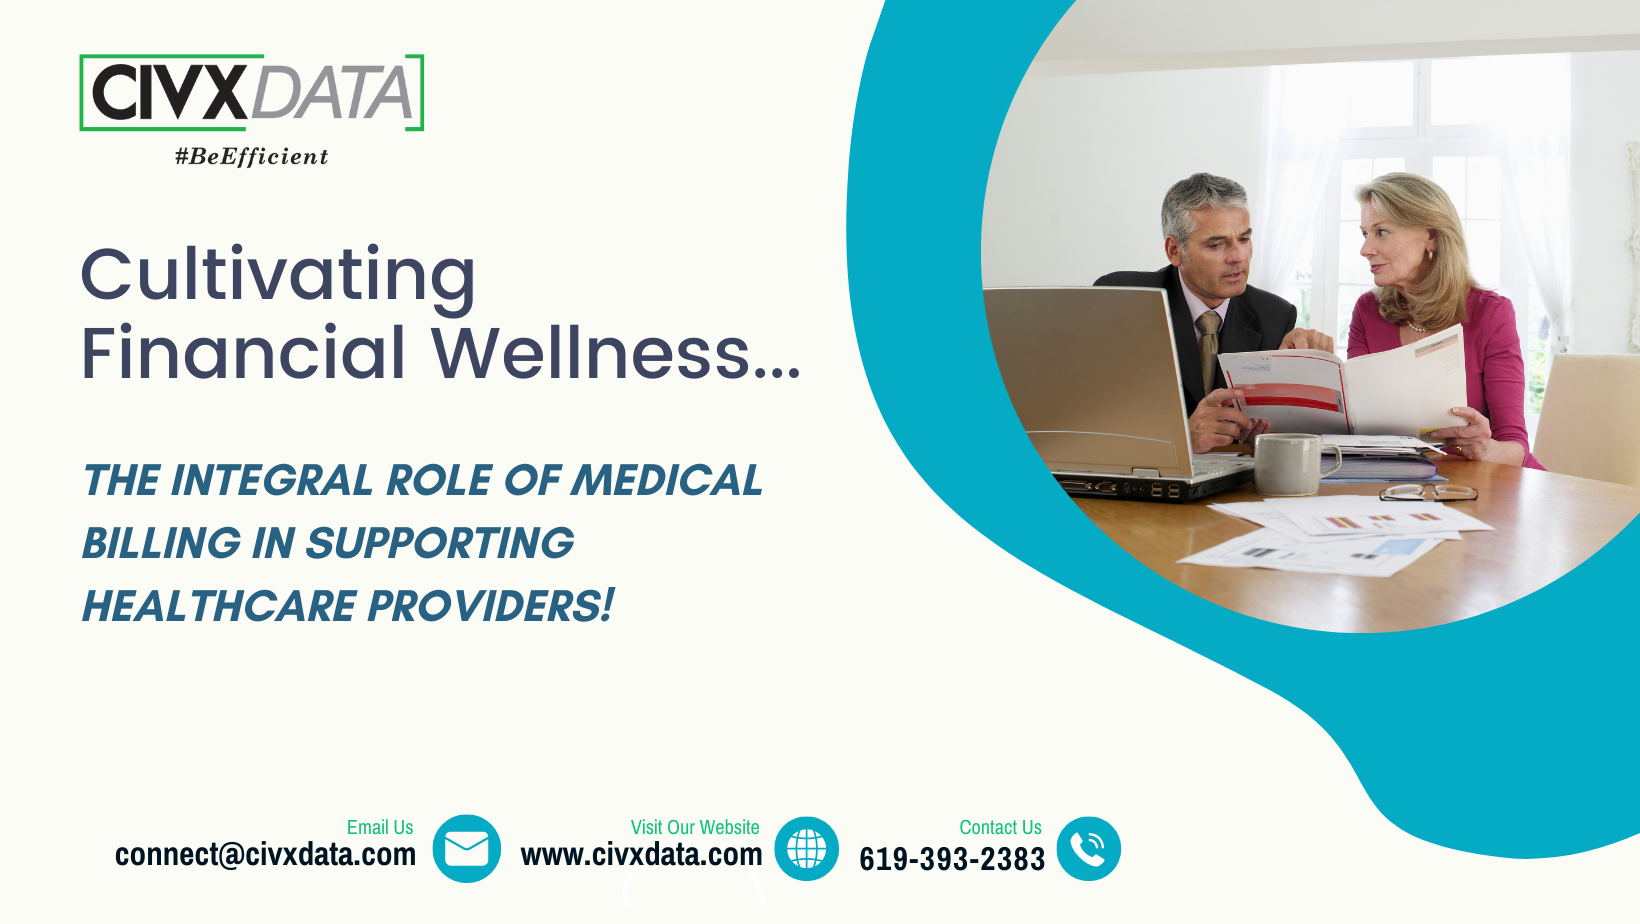 Cultivating Financial Wellness, The Integral Role of Medical Billing in Supporting Healthcare Providers